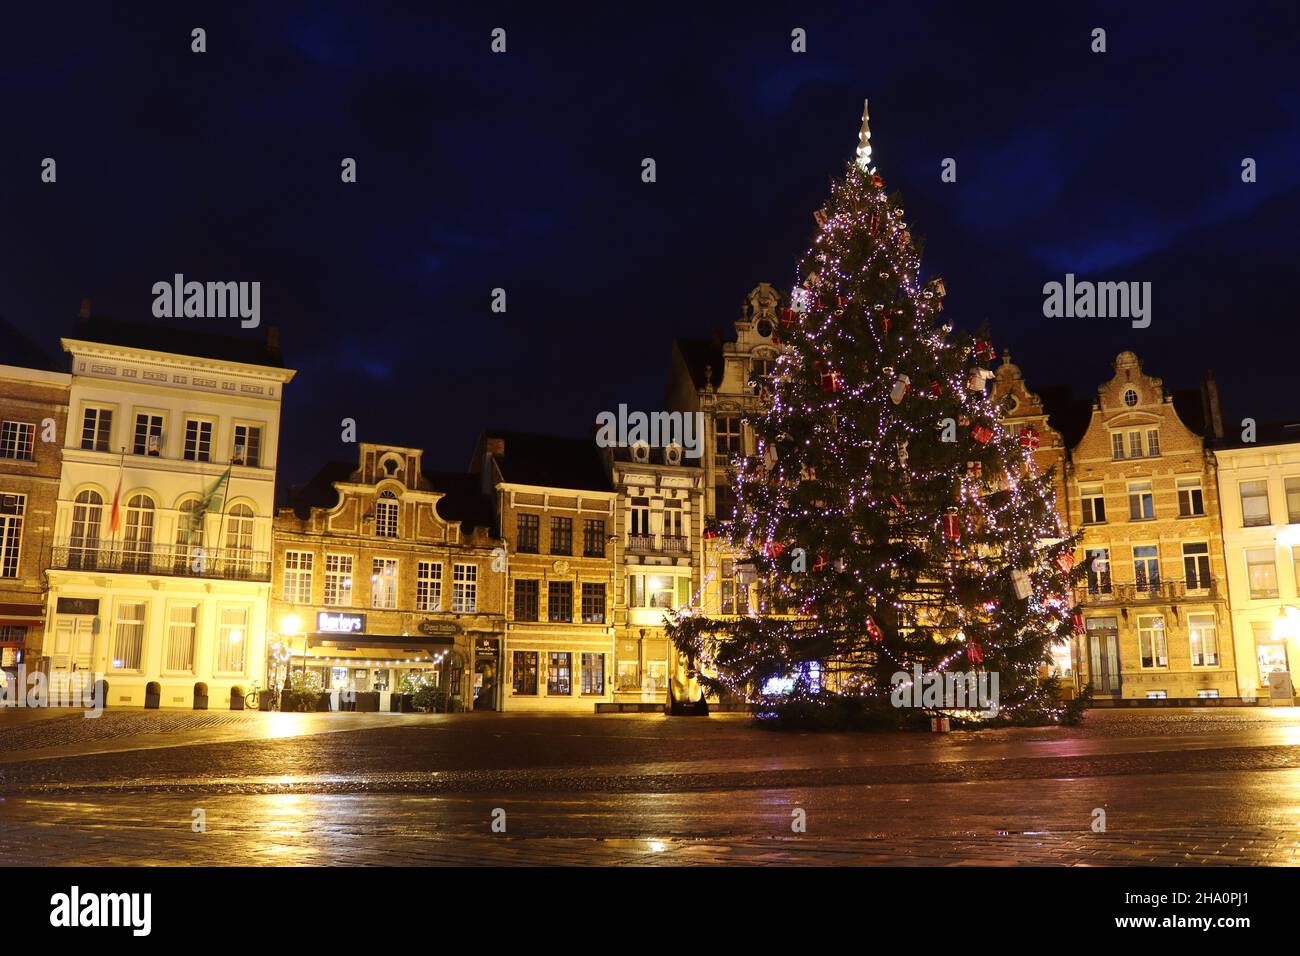 DENDERMONDE, BELGIUM, 4 DECEMBER 2021: Nigh-time view of the Christmas Tree and Lights on the main market square in Dendermonde. Dendermonde is a town Stock Photo